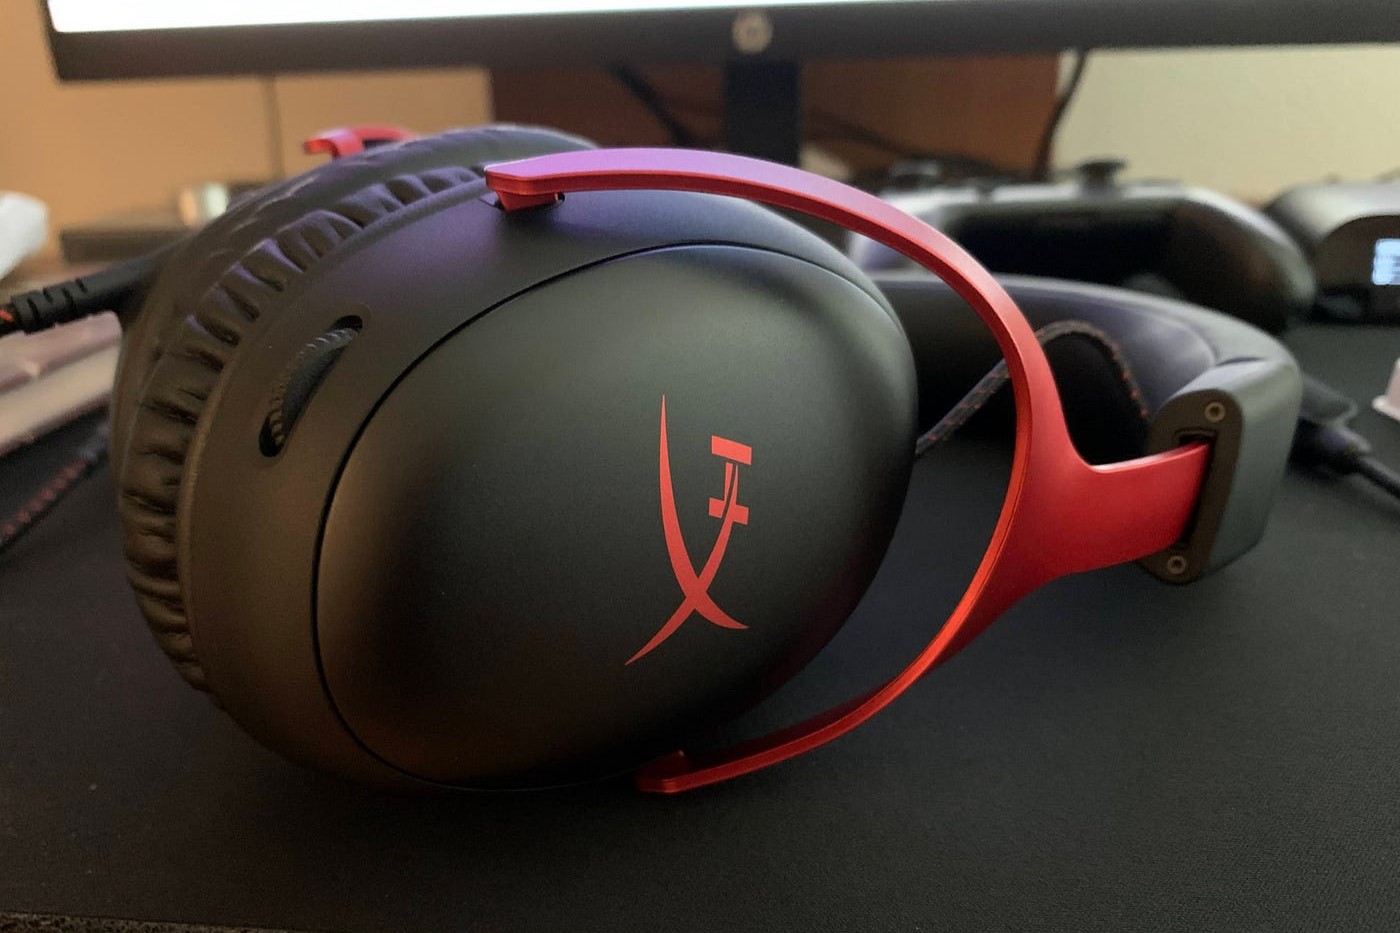 Troubleshooting Your HyperX Headset: Common Issues & Fixes